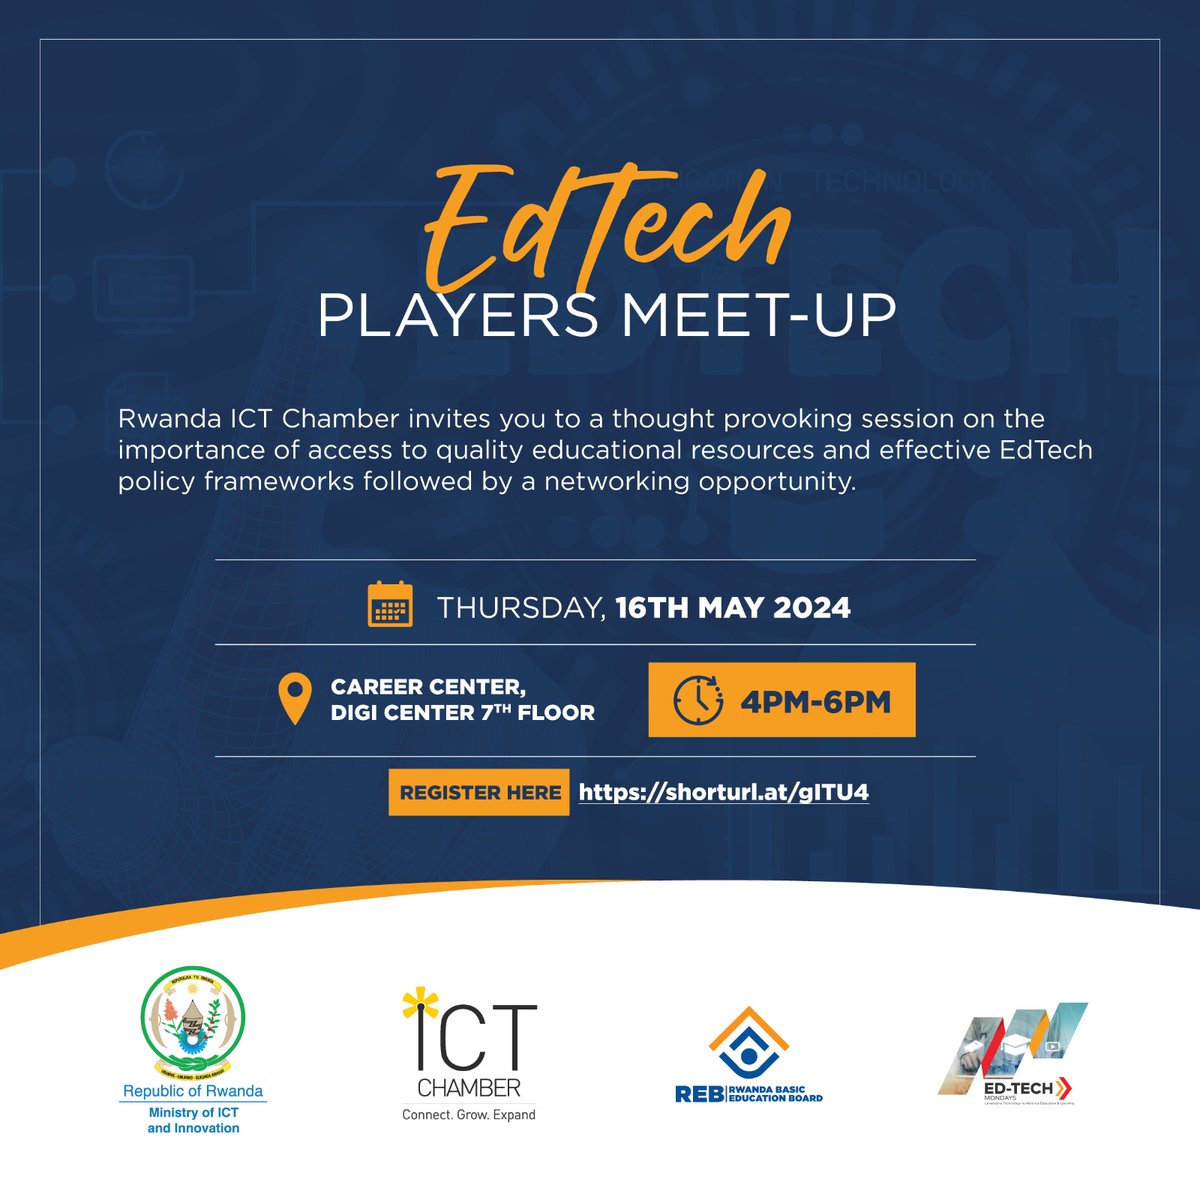 Are you an EdTech Start up or enthusiast?

@rwictchamber invites you to an interactive meetup to discuss the status of access to quality educational resources and EdTech policy frameworks leading the ecosystem in Rwanda. 

🎯 16th May from 4pm
Register 👇🏽
shorturl.at/gITU4